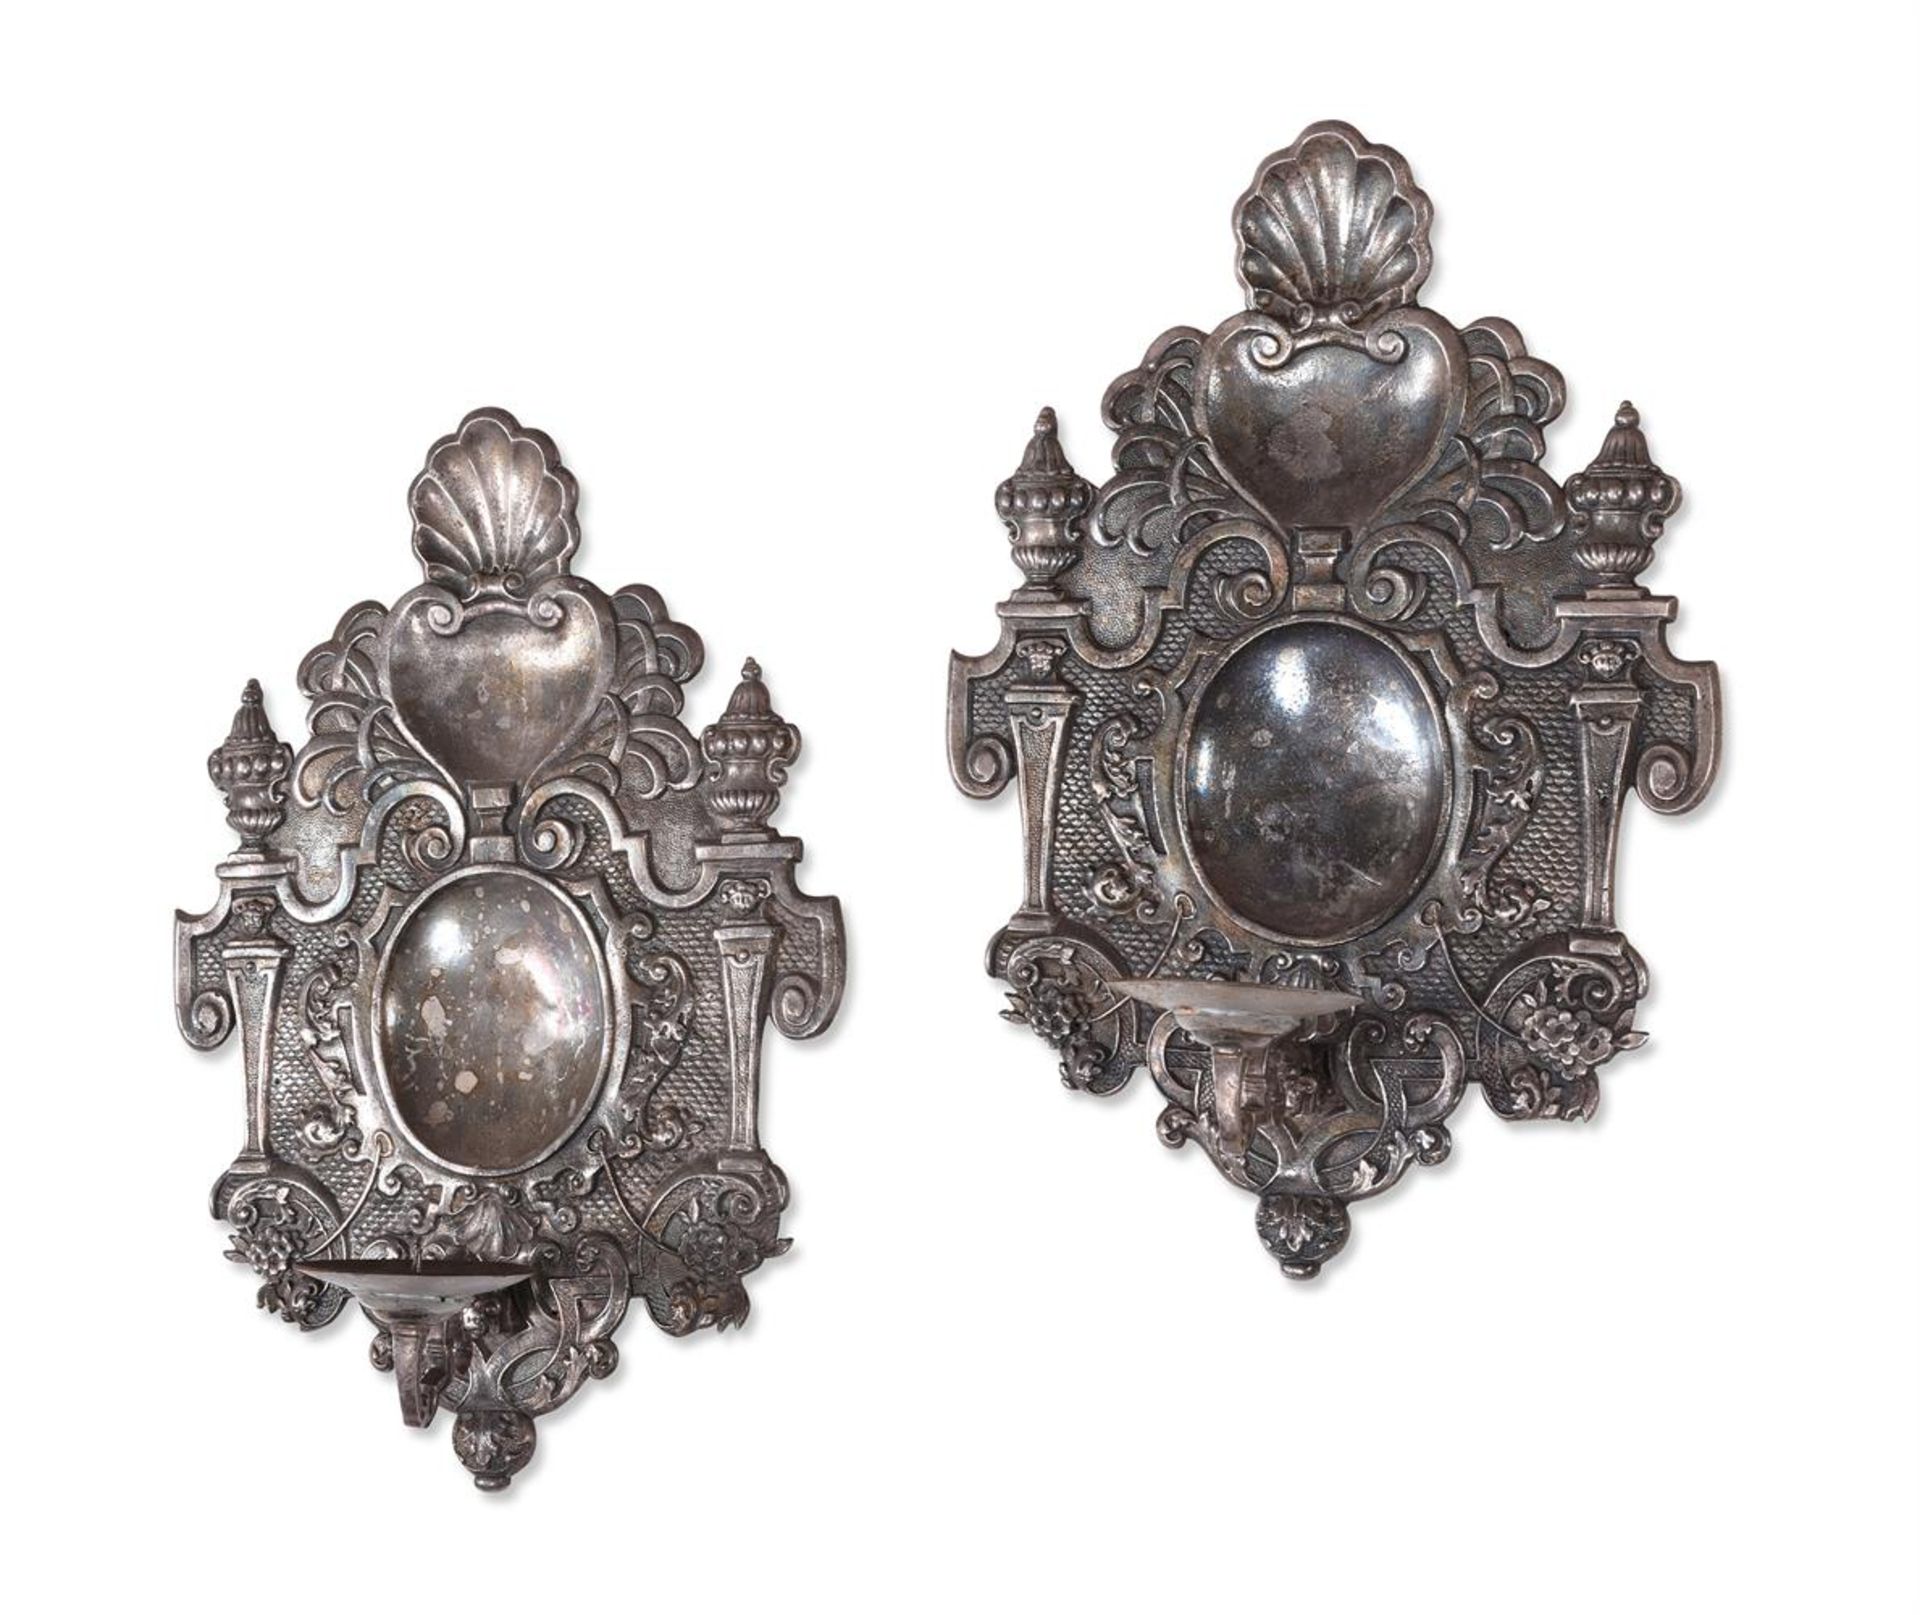 A PAIR OF POLISHED PEWTER WALL SCONCES, 19TH CENTURY, IN THE 17TH CENTURY MANNER